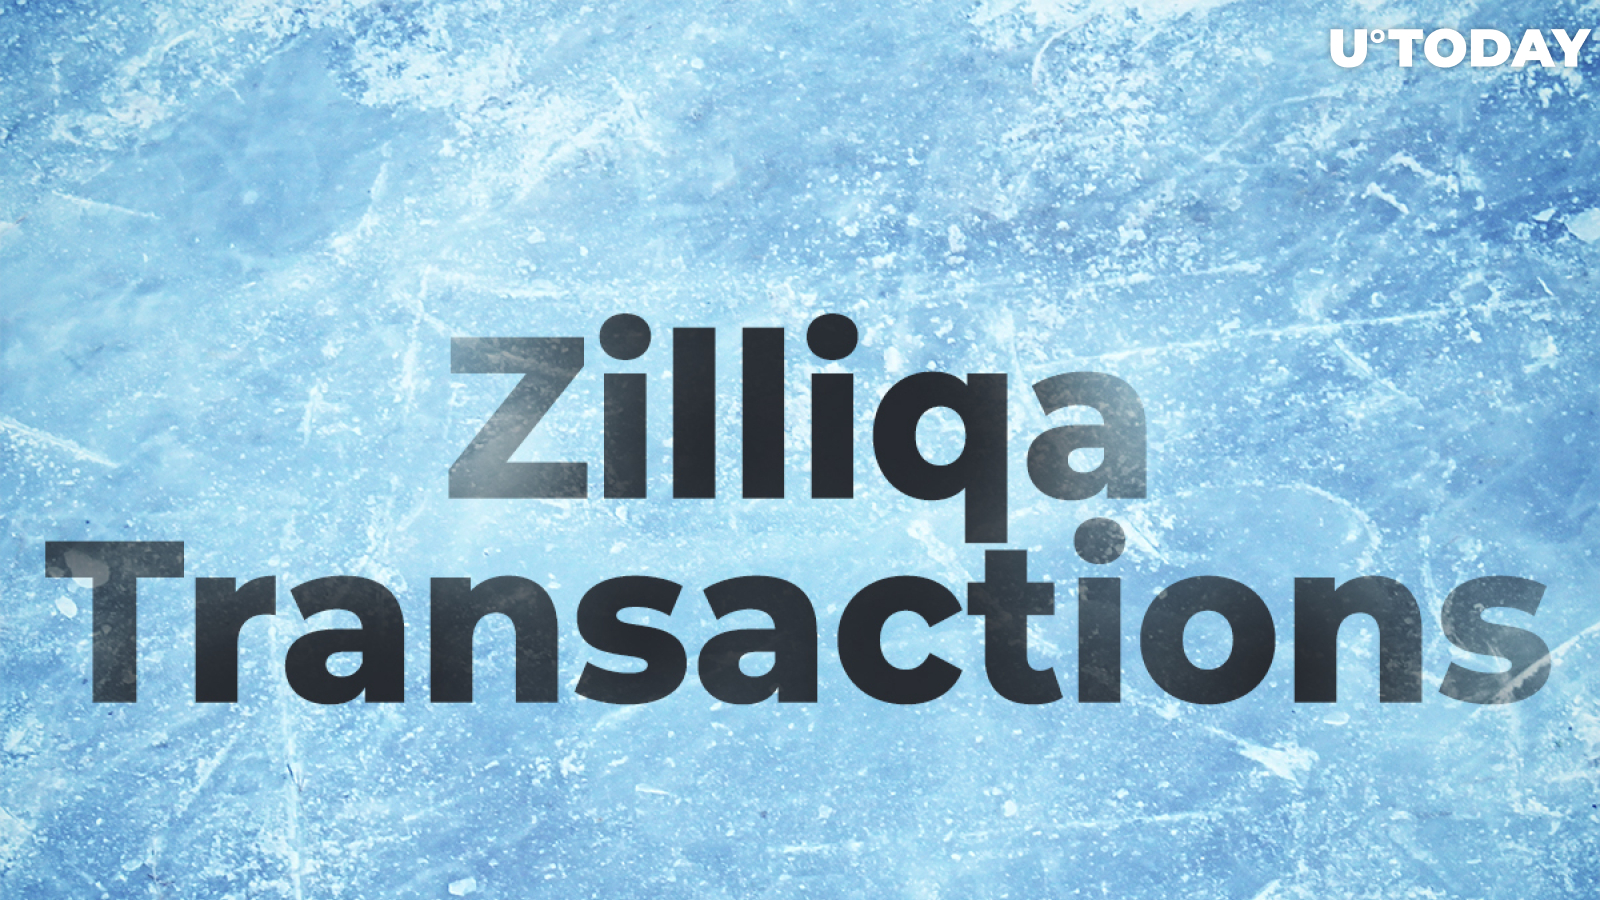 Zilliqa (ZIL) Transactions Frozen for 24 Hours So Far: See Post-Mortem